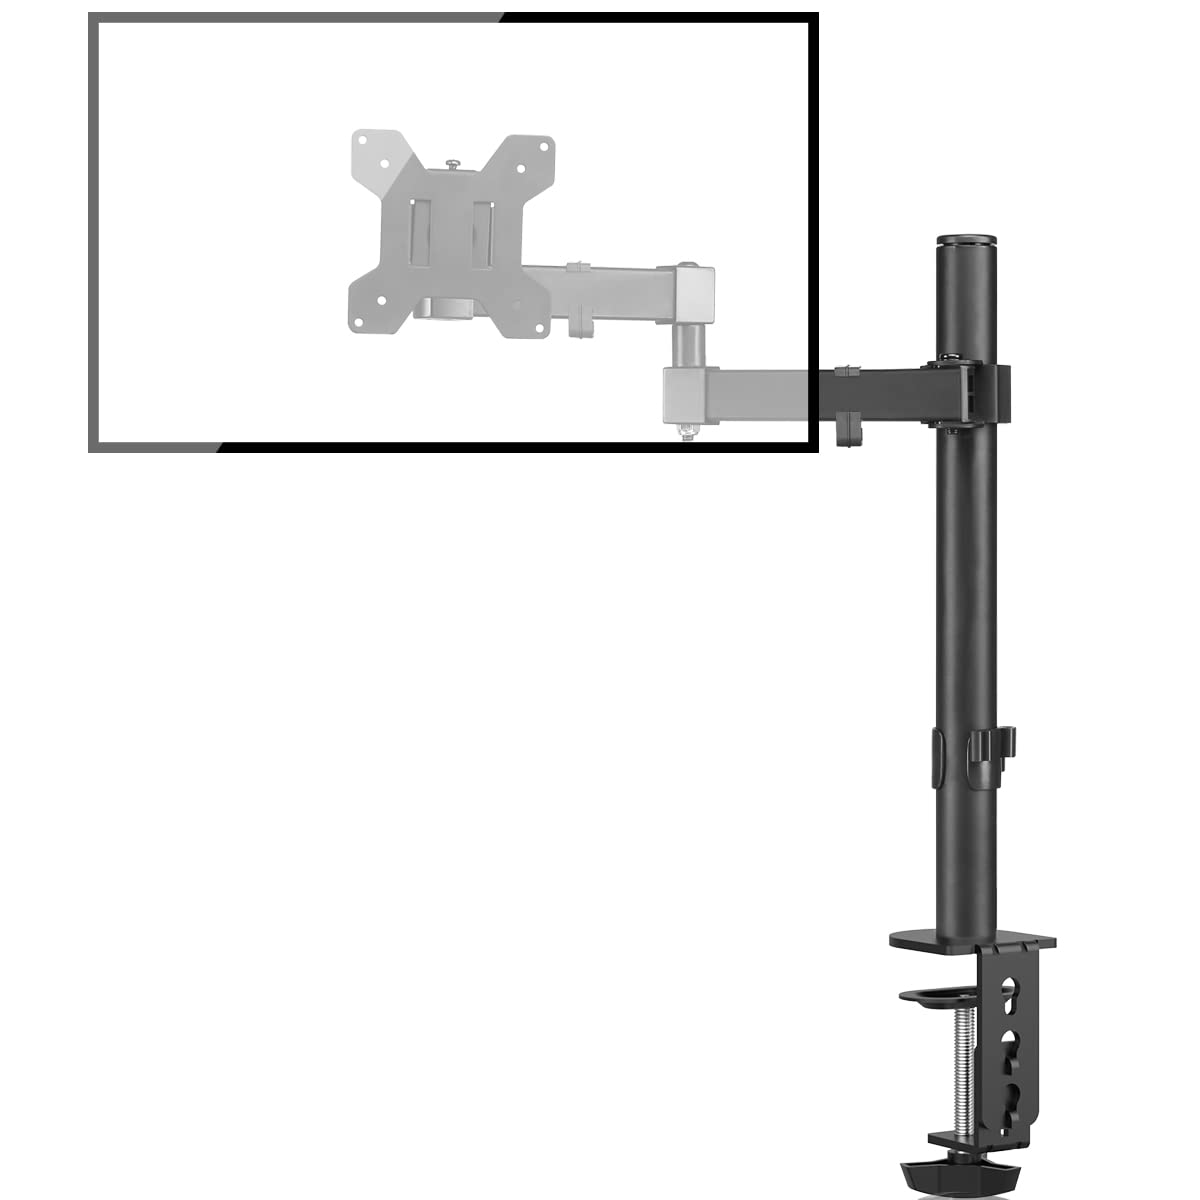 Bracwiser Monitor Mount Single Fully Adjustable Arm Fits One Screen 13-32 inch 22lbs for Monitor computer Screen 13 15 17 19 20 